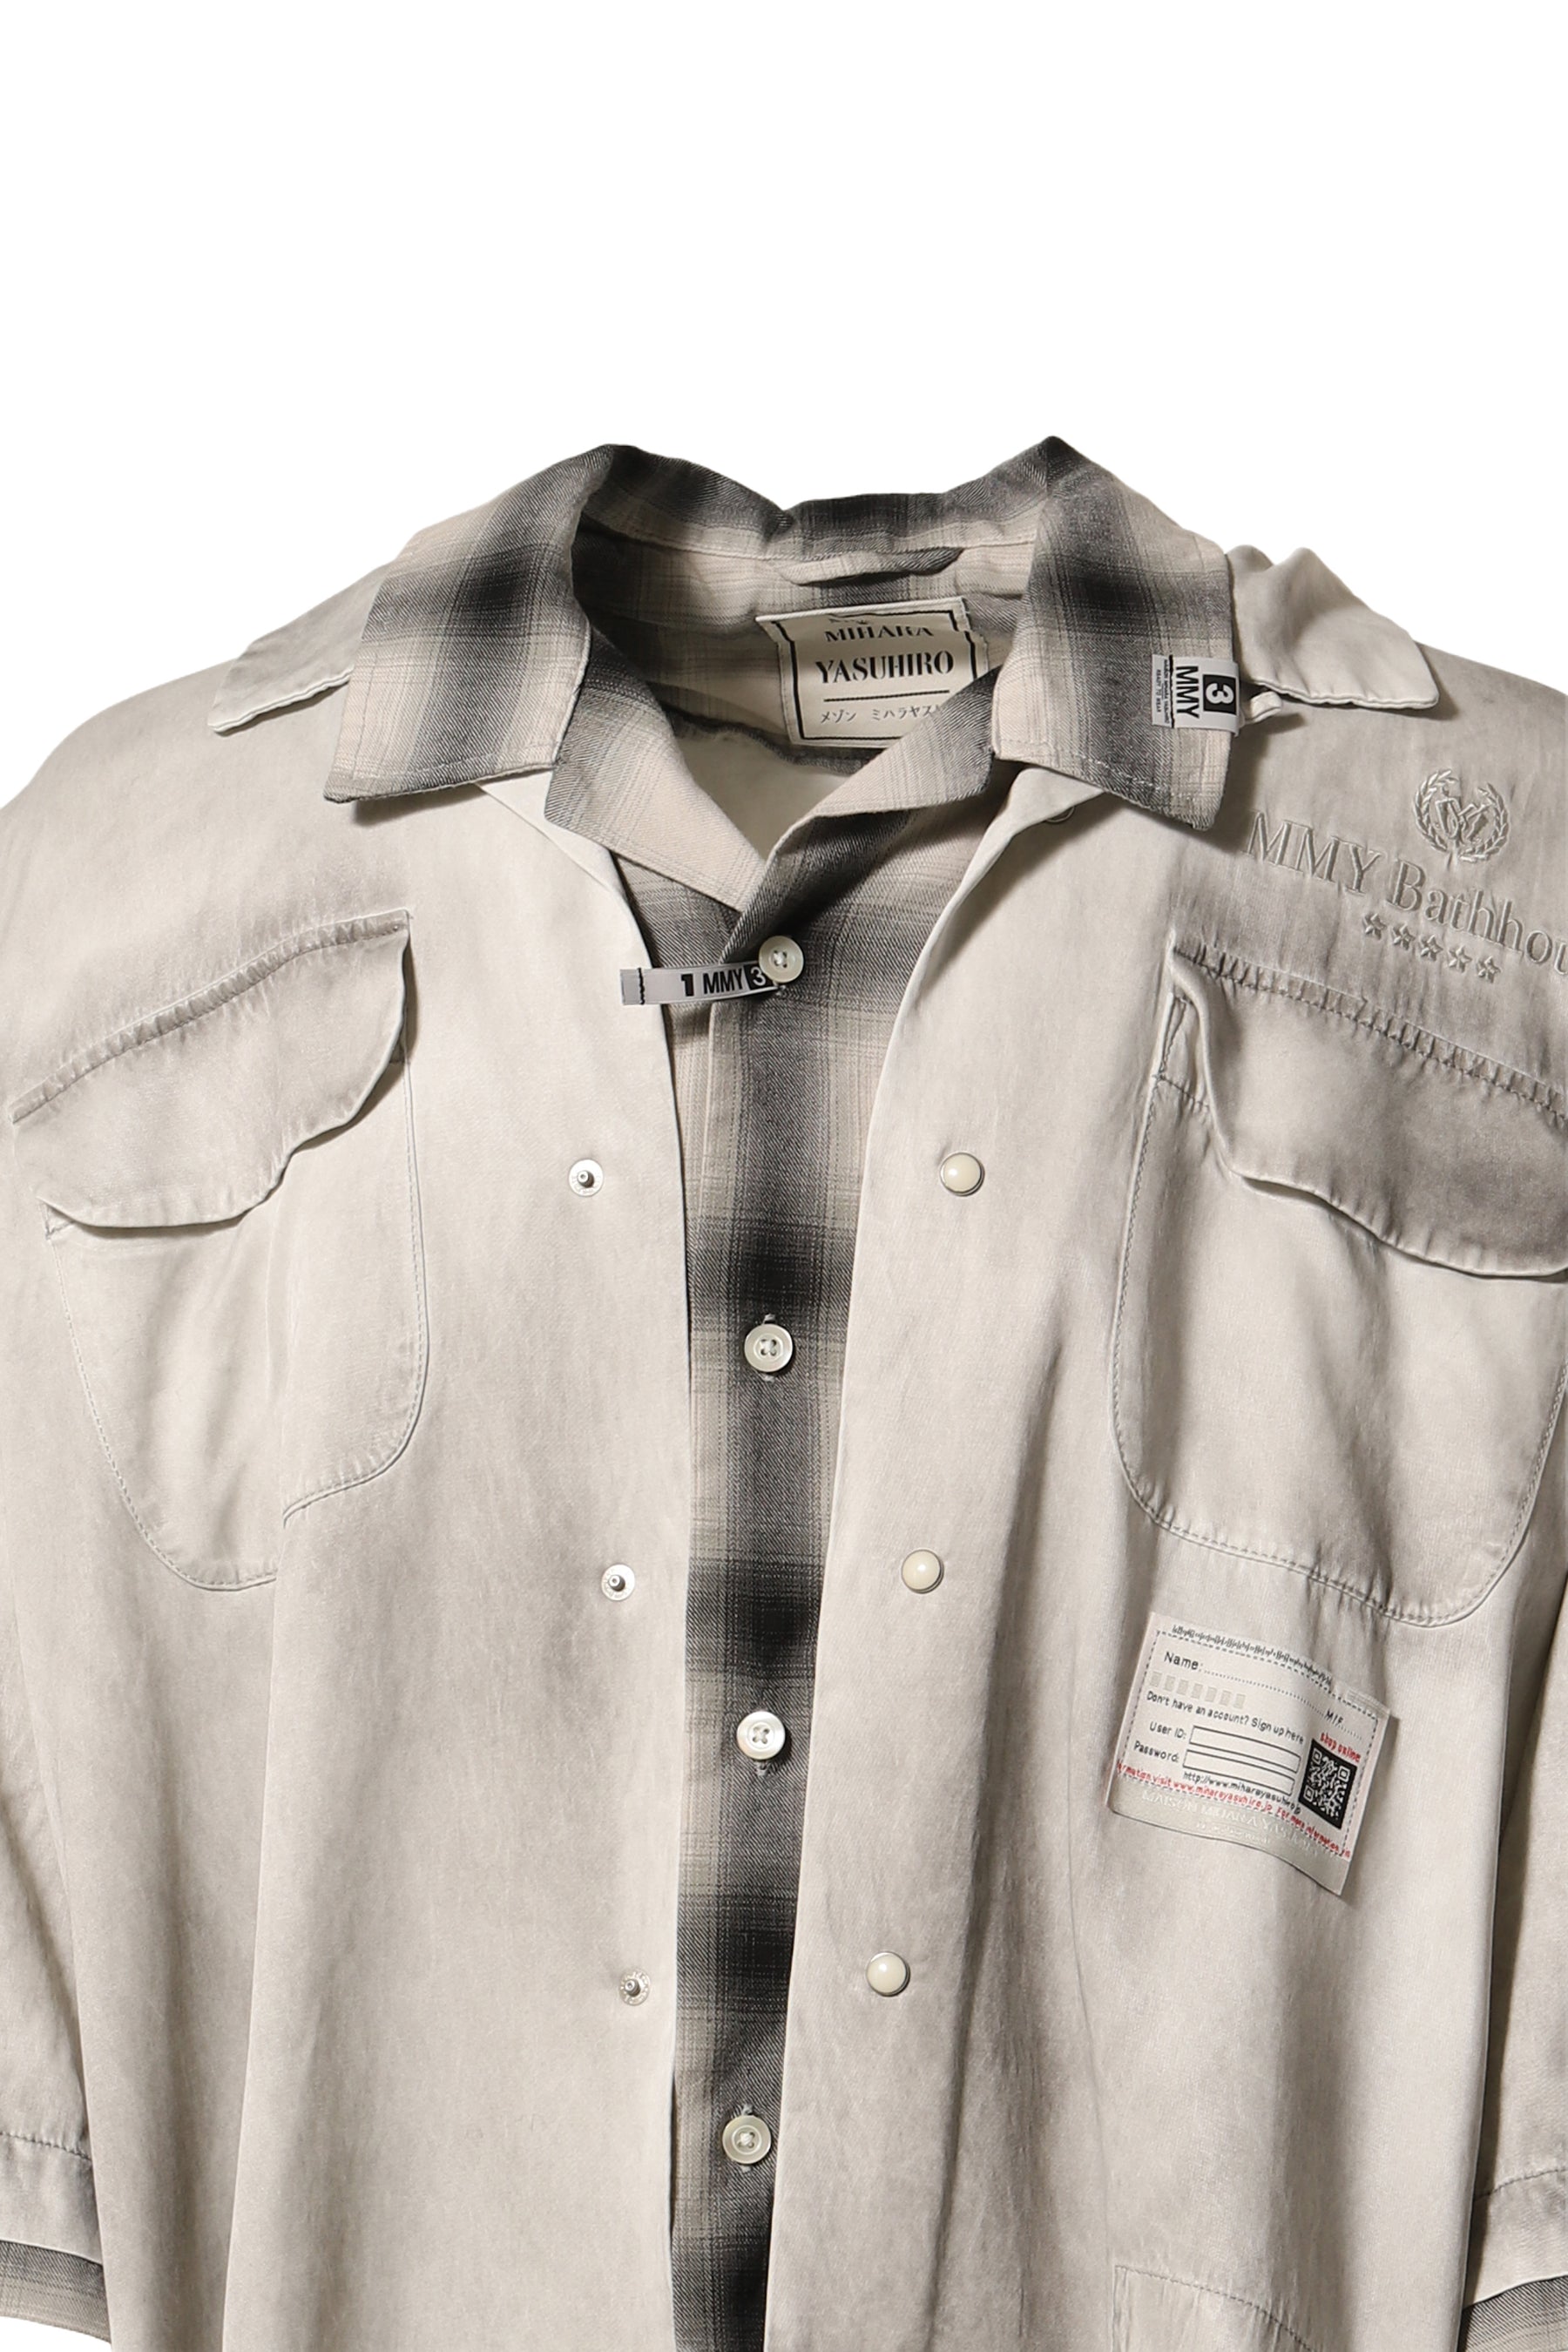 RC TWILL DOUBLE LAYERED S/S SHIRTS / LT.GRY